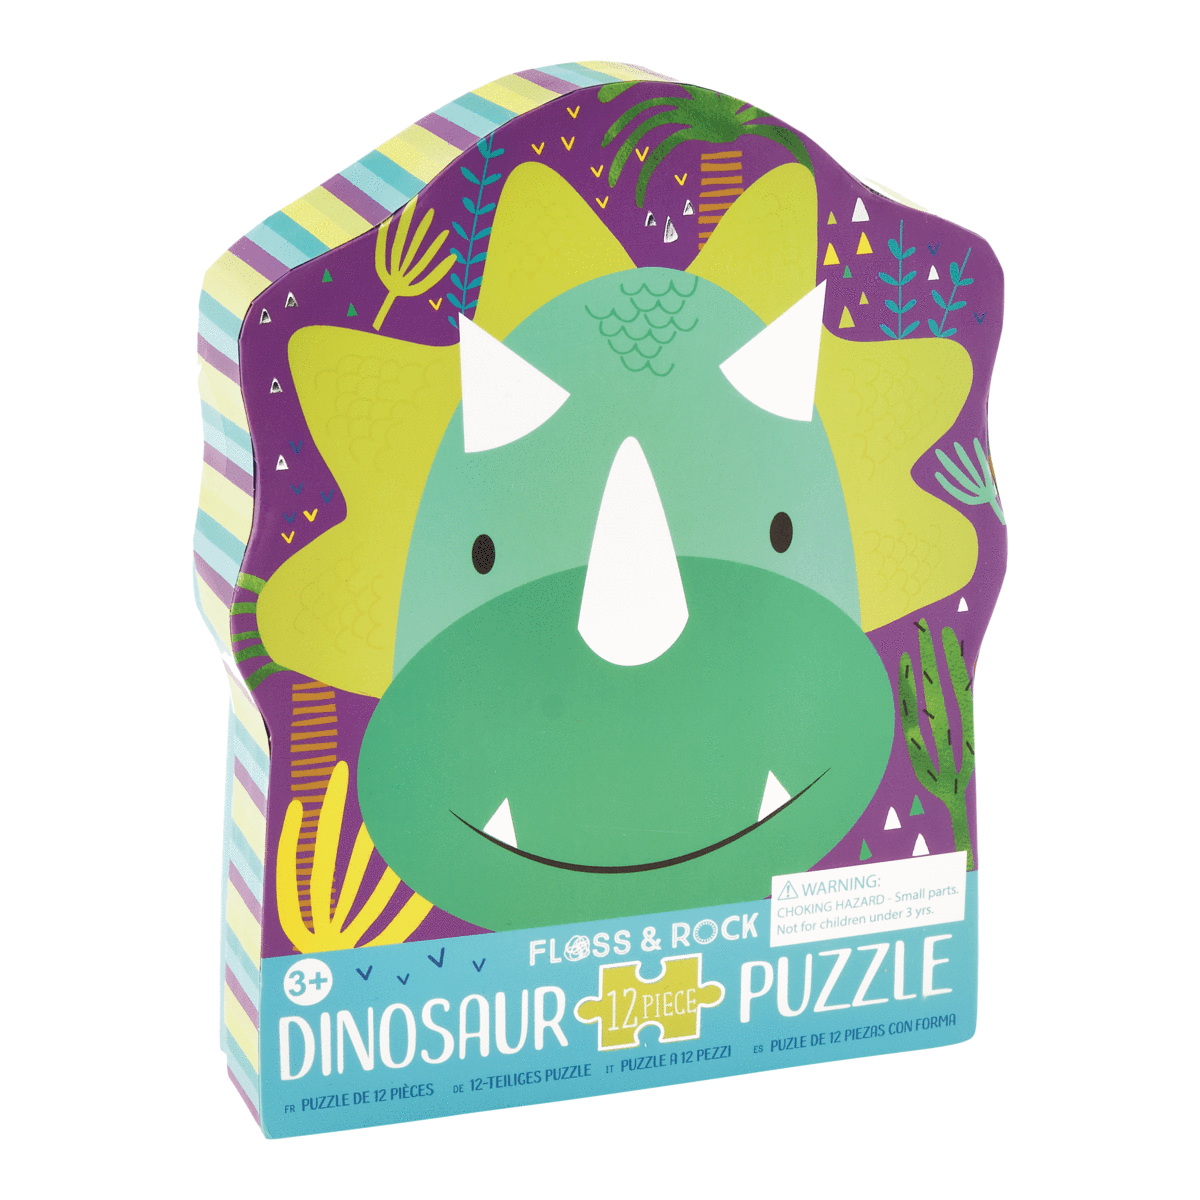 Green and purple box for a dinosaur jigsaw puzzle.